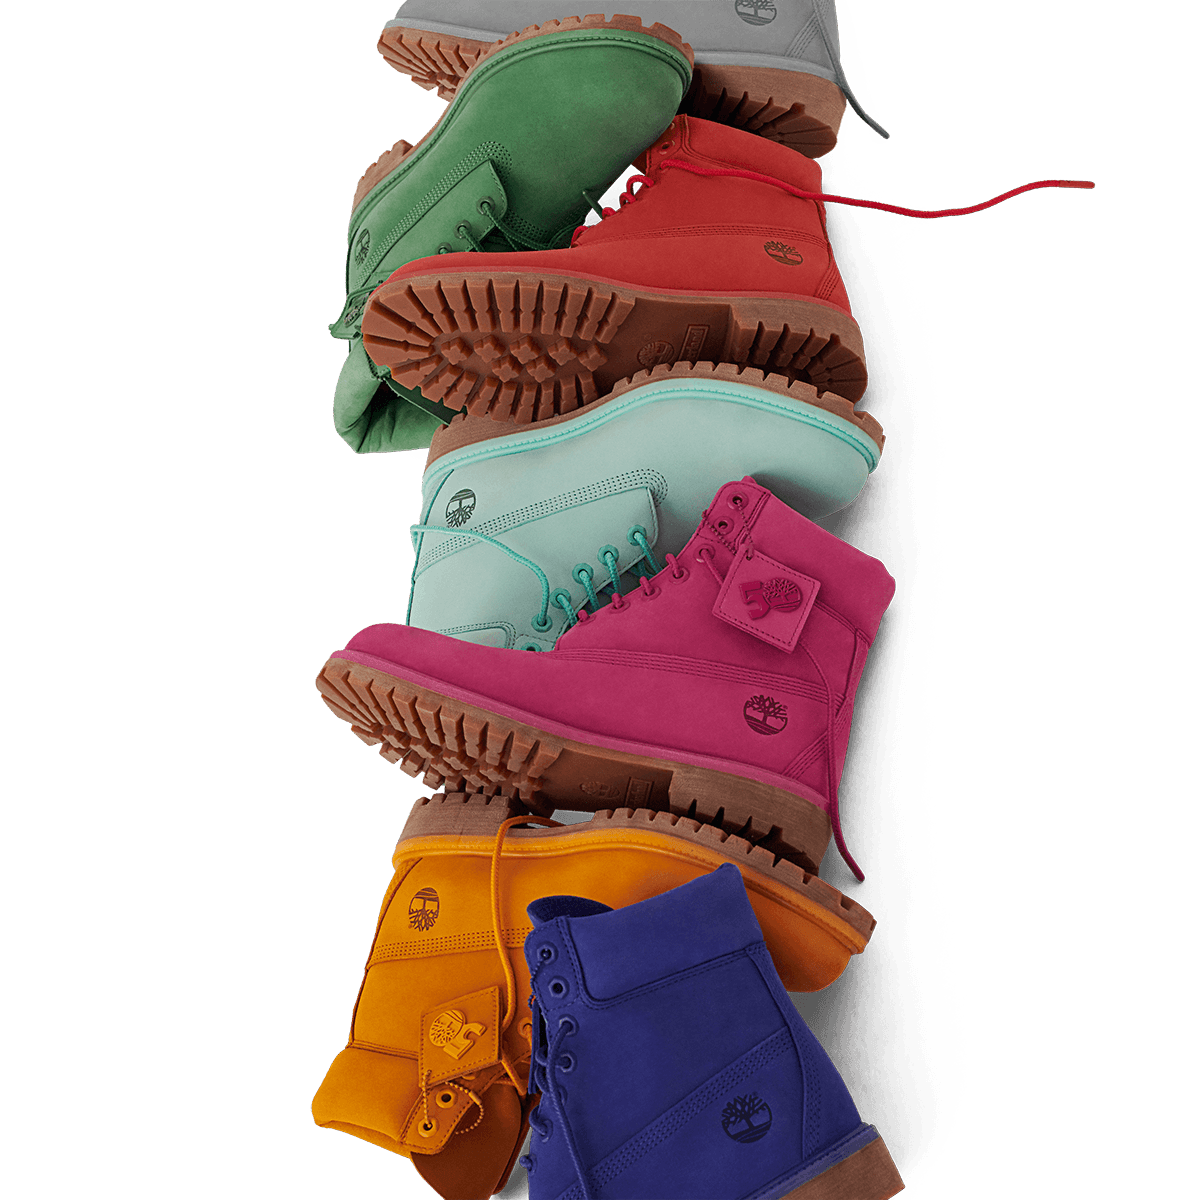 A group of colorful boots stacked on top of each other.